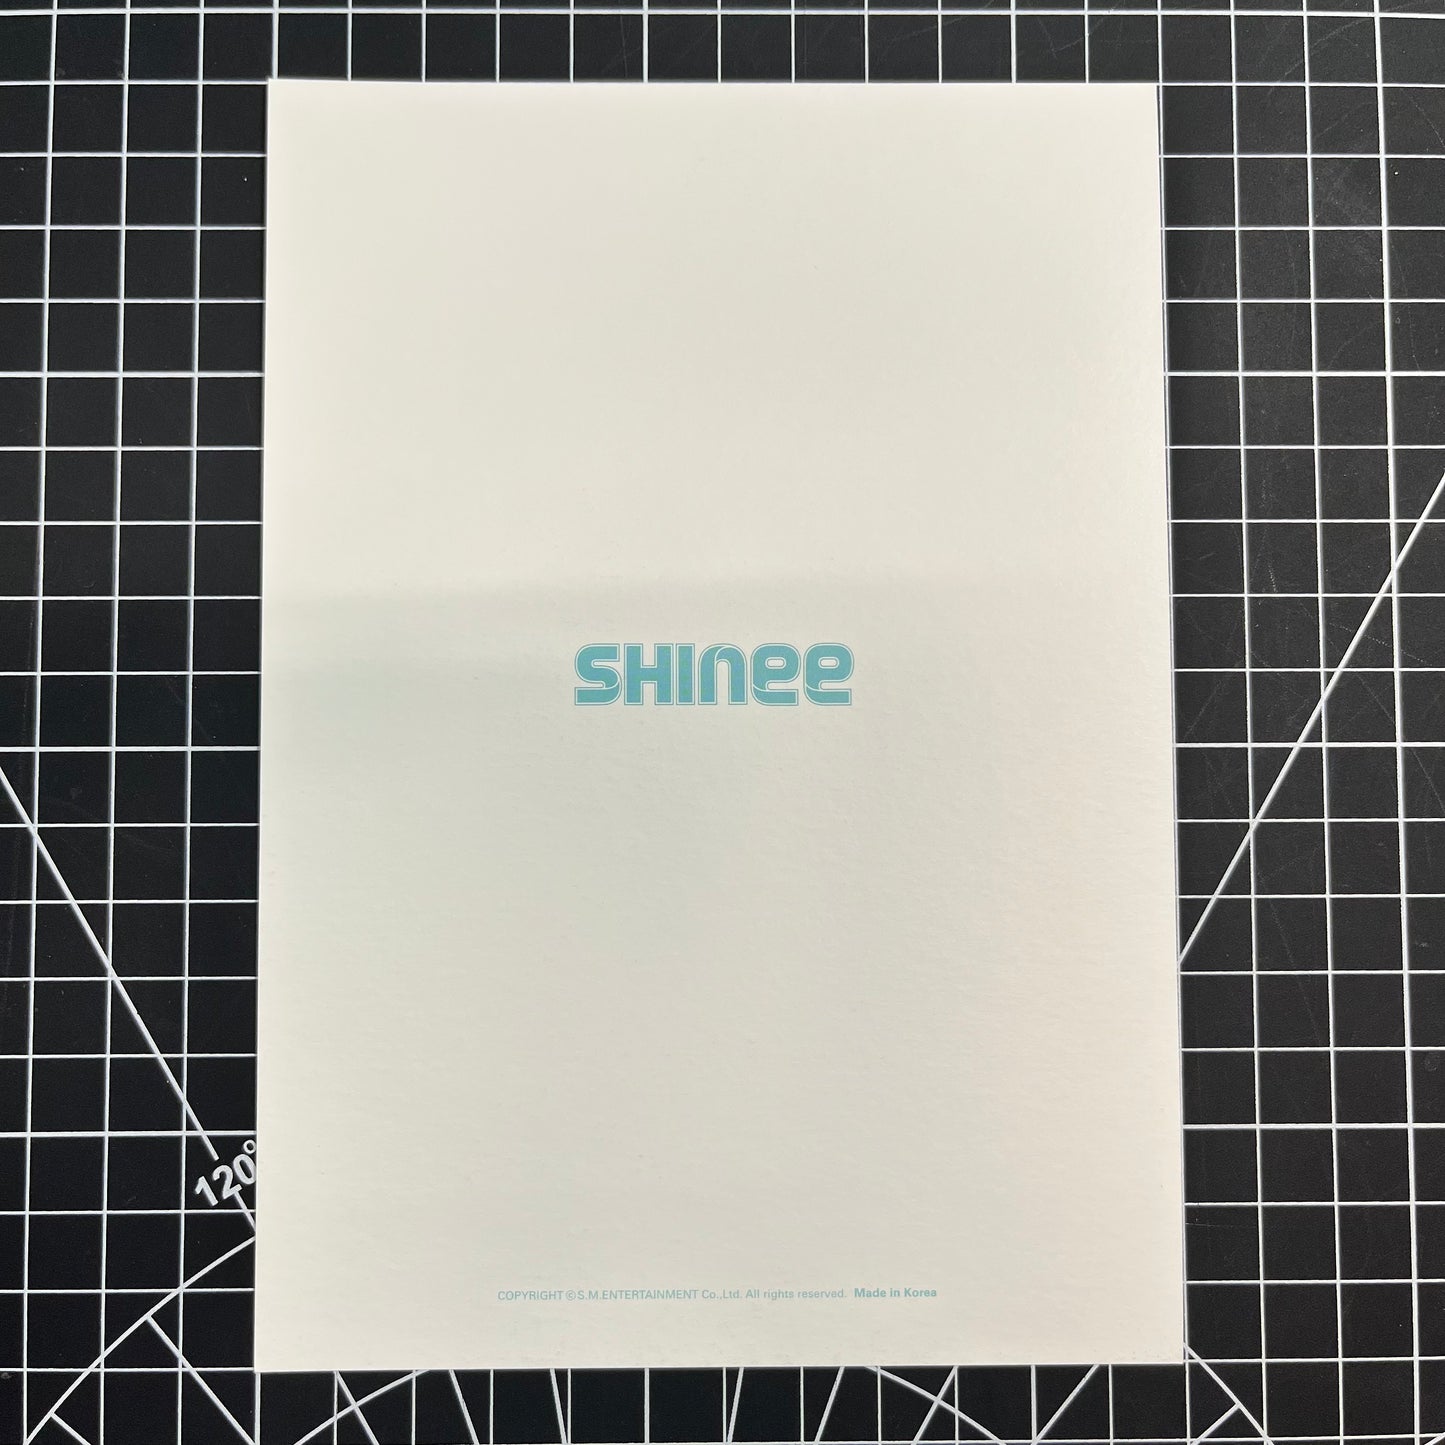 SHINee SMTOWN Week Limited Edition Official Postcards - Onew